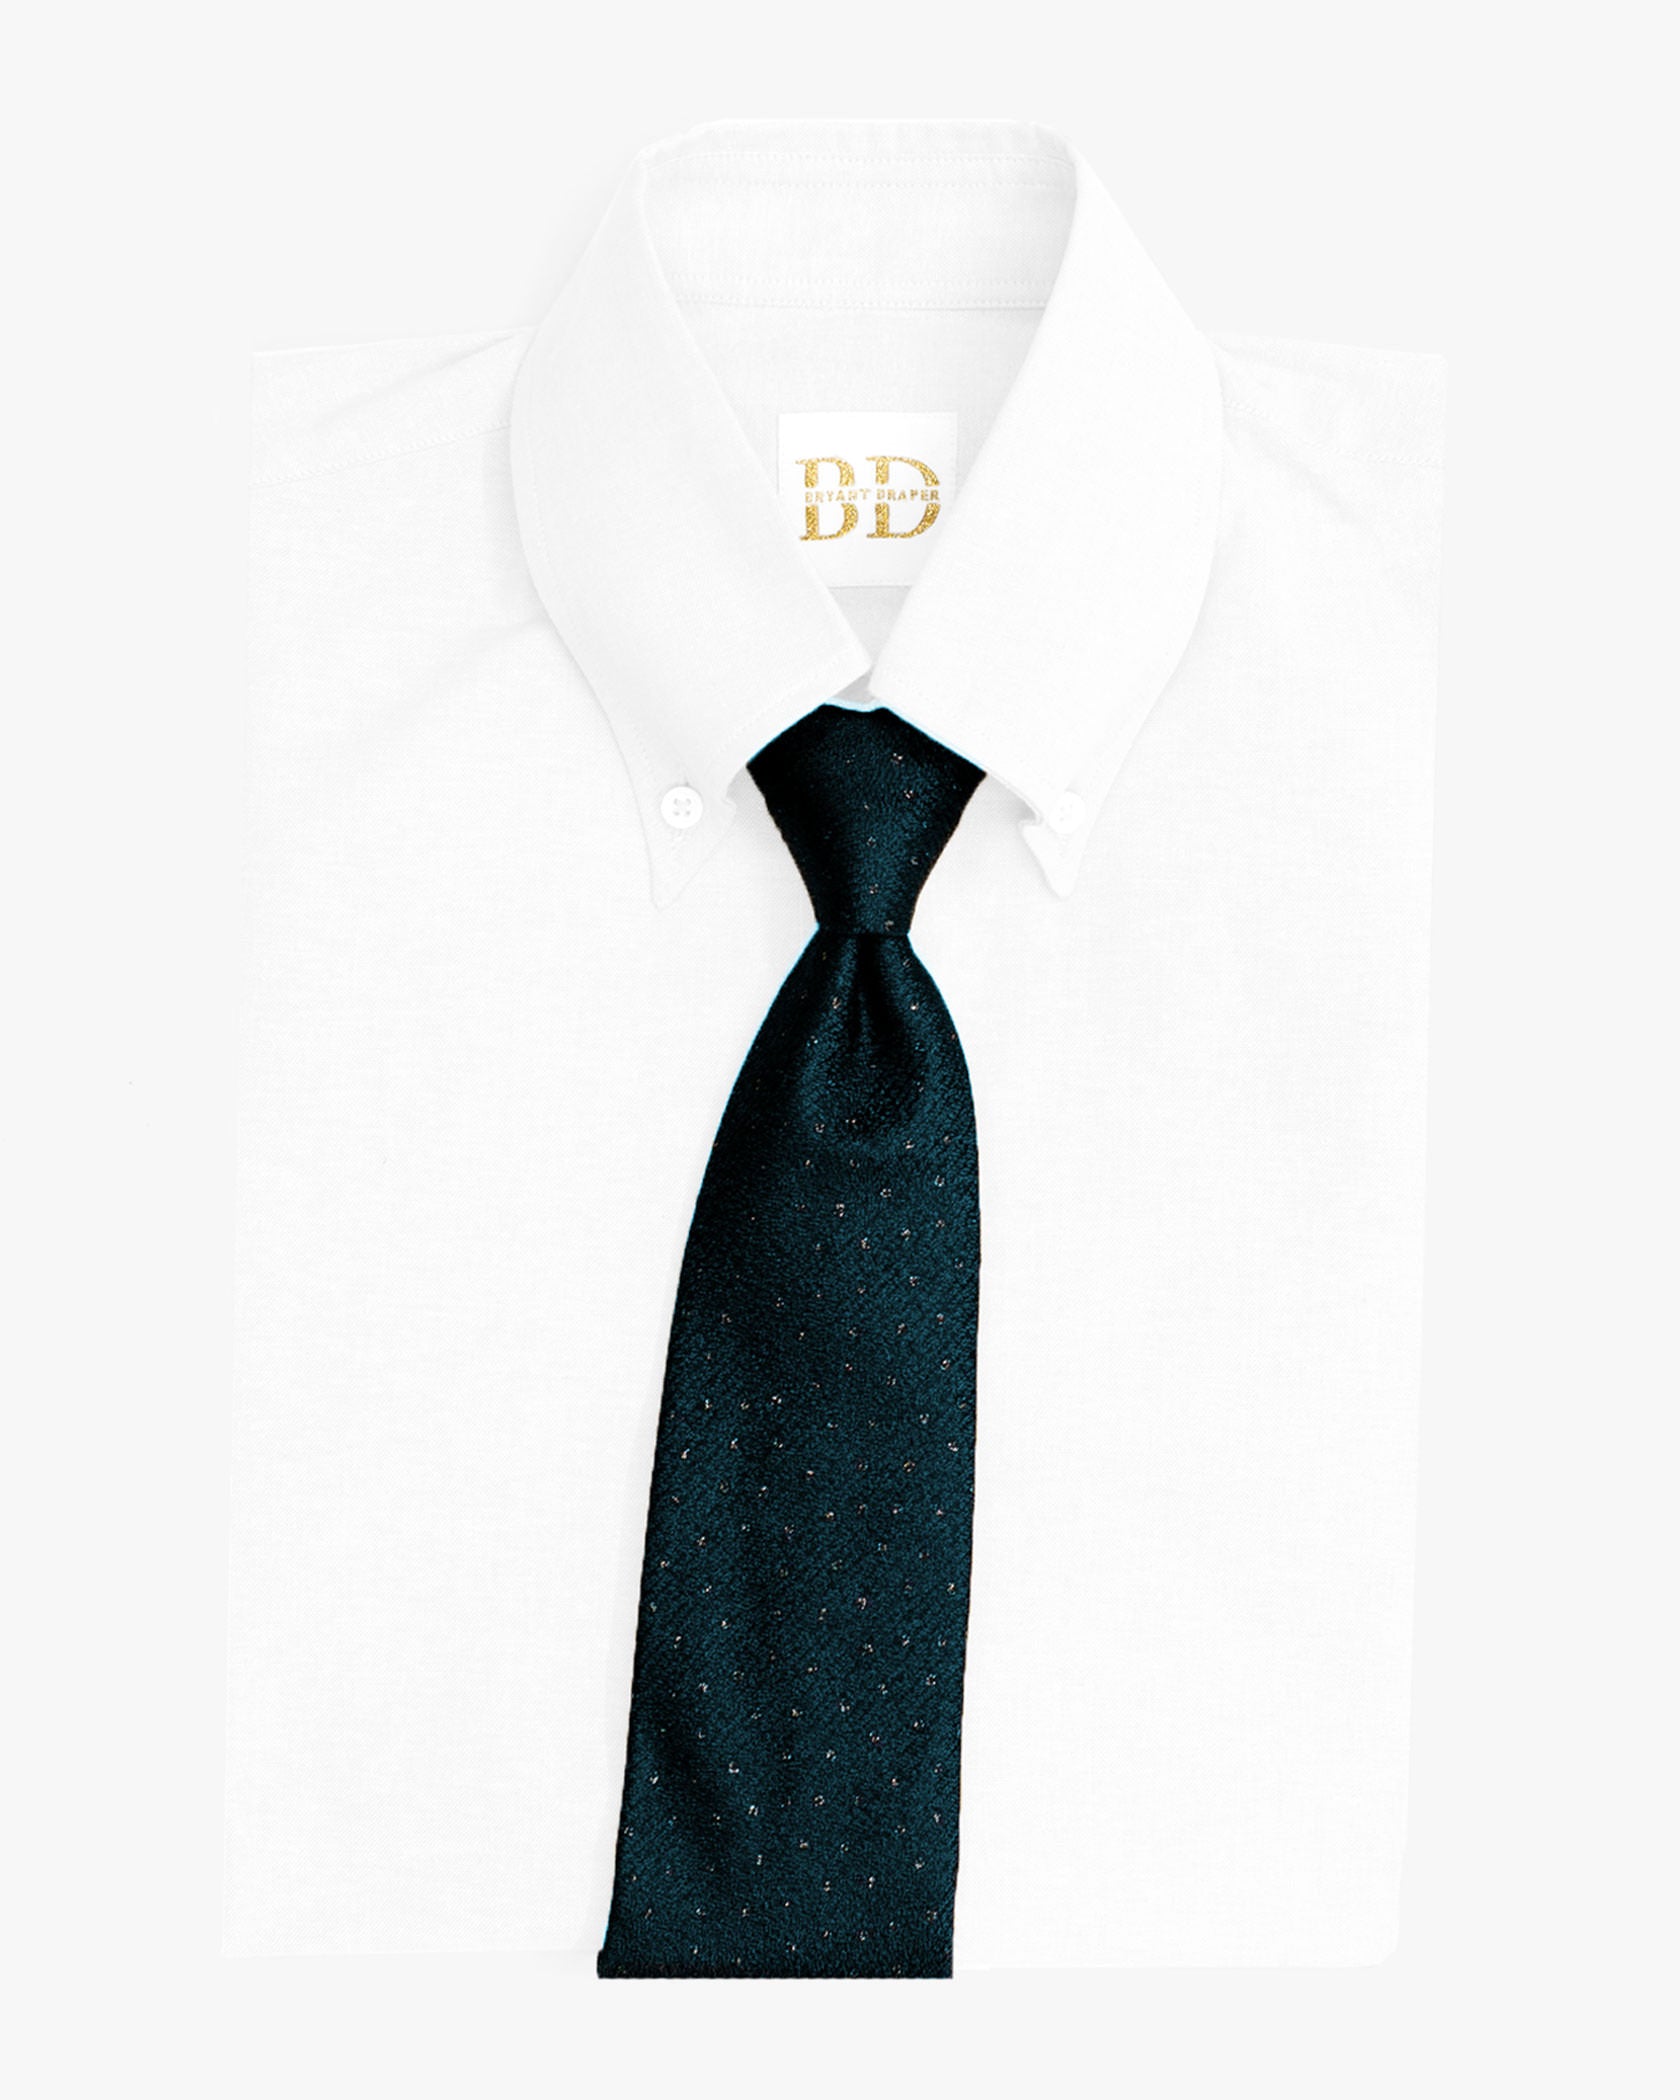 Green and Silver Dot Necktie